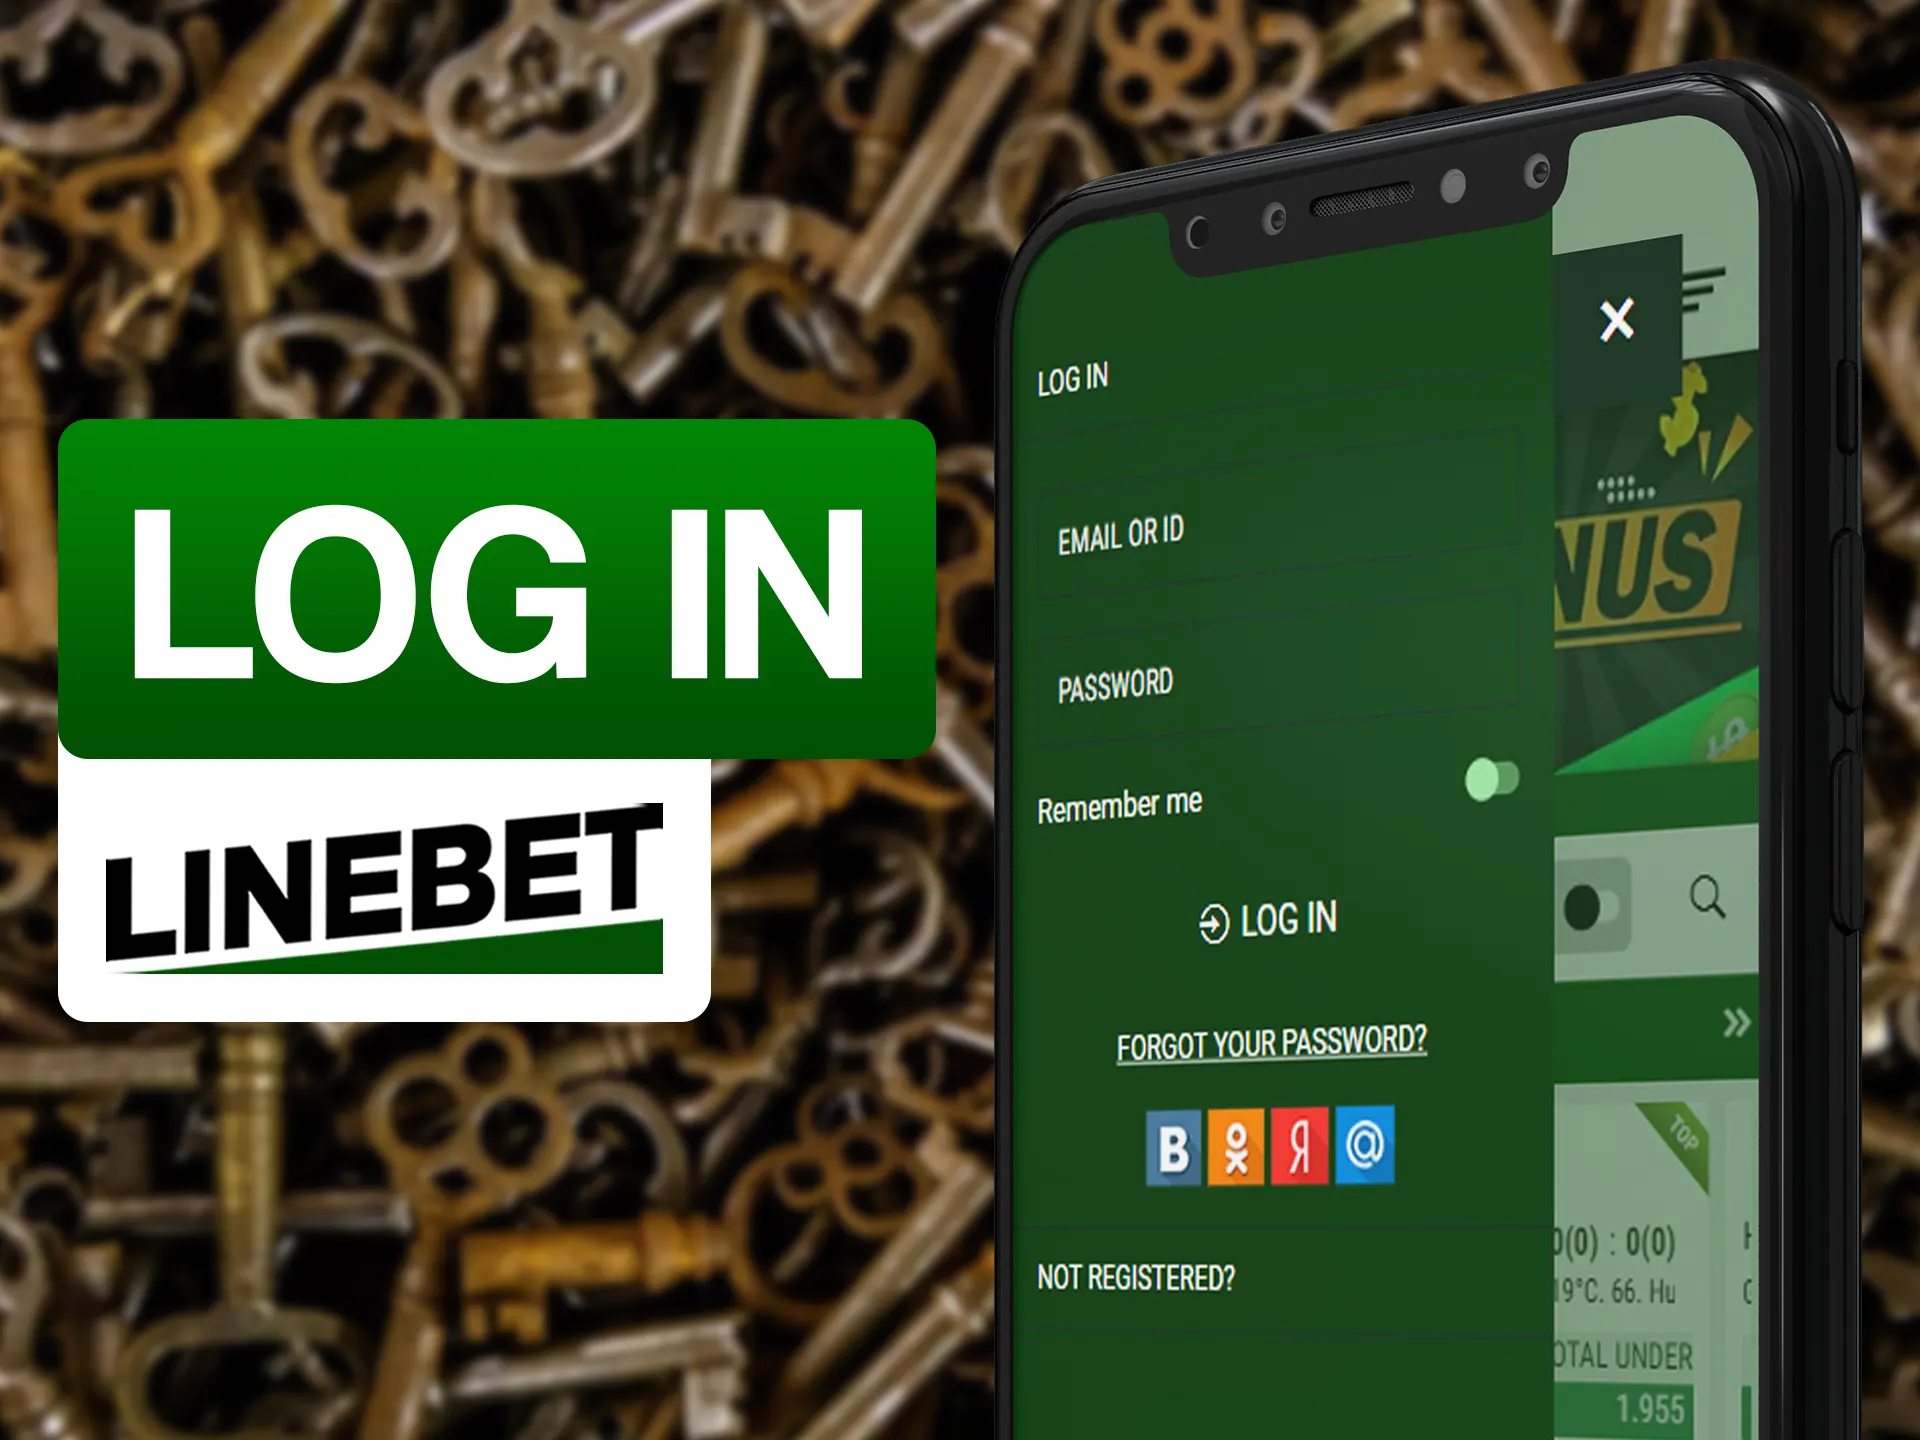 Log in in app using your Linebet account.